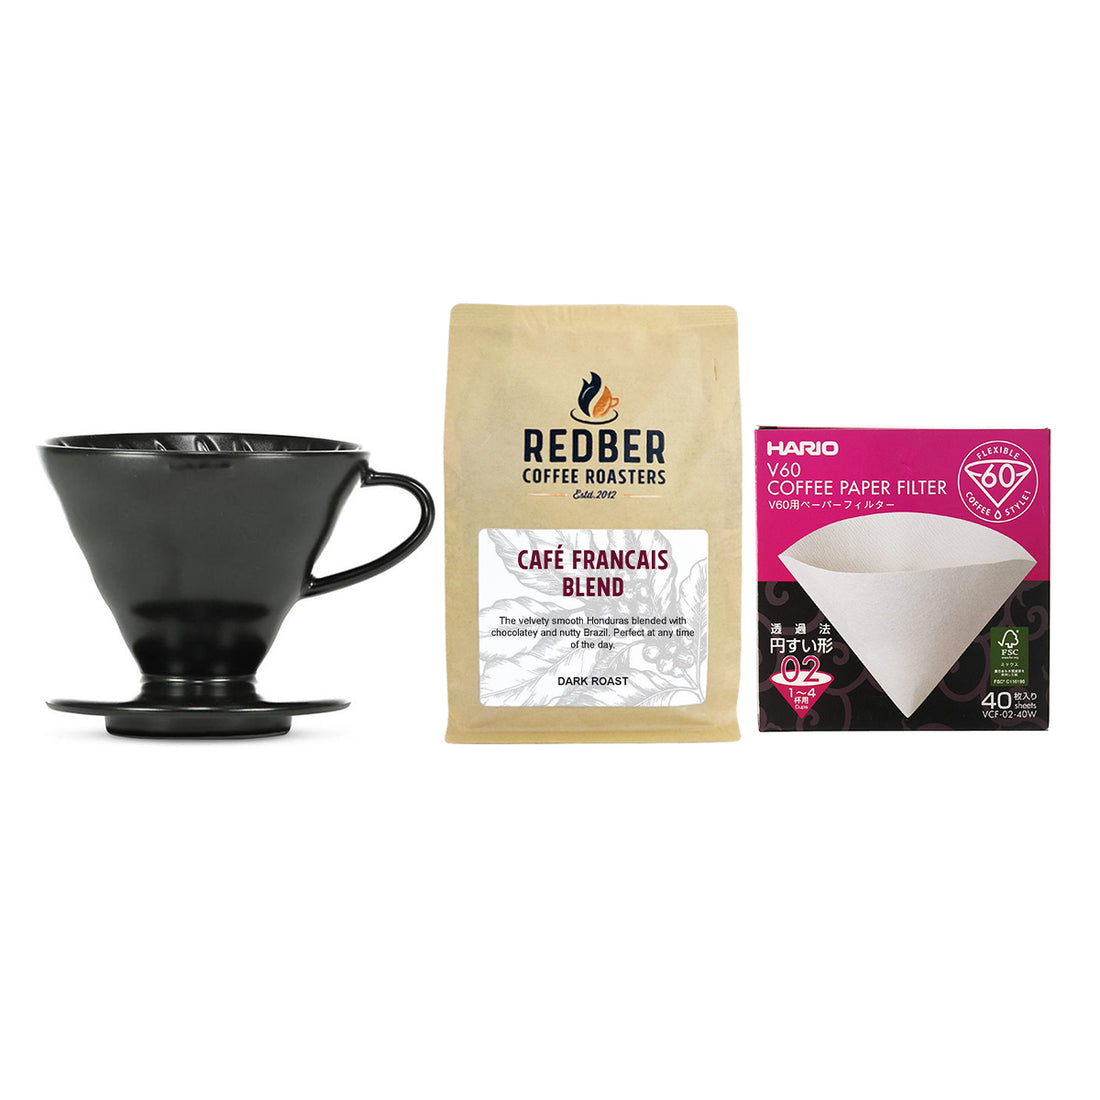 Redber, Hario V60 Size 02 Ceramic Coffee Dripper & 40pcs Filter Papers - Coffee Brewing Kit, Redber Coffee